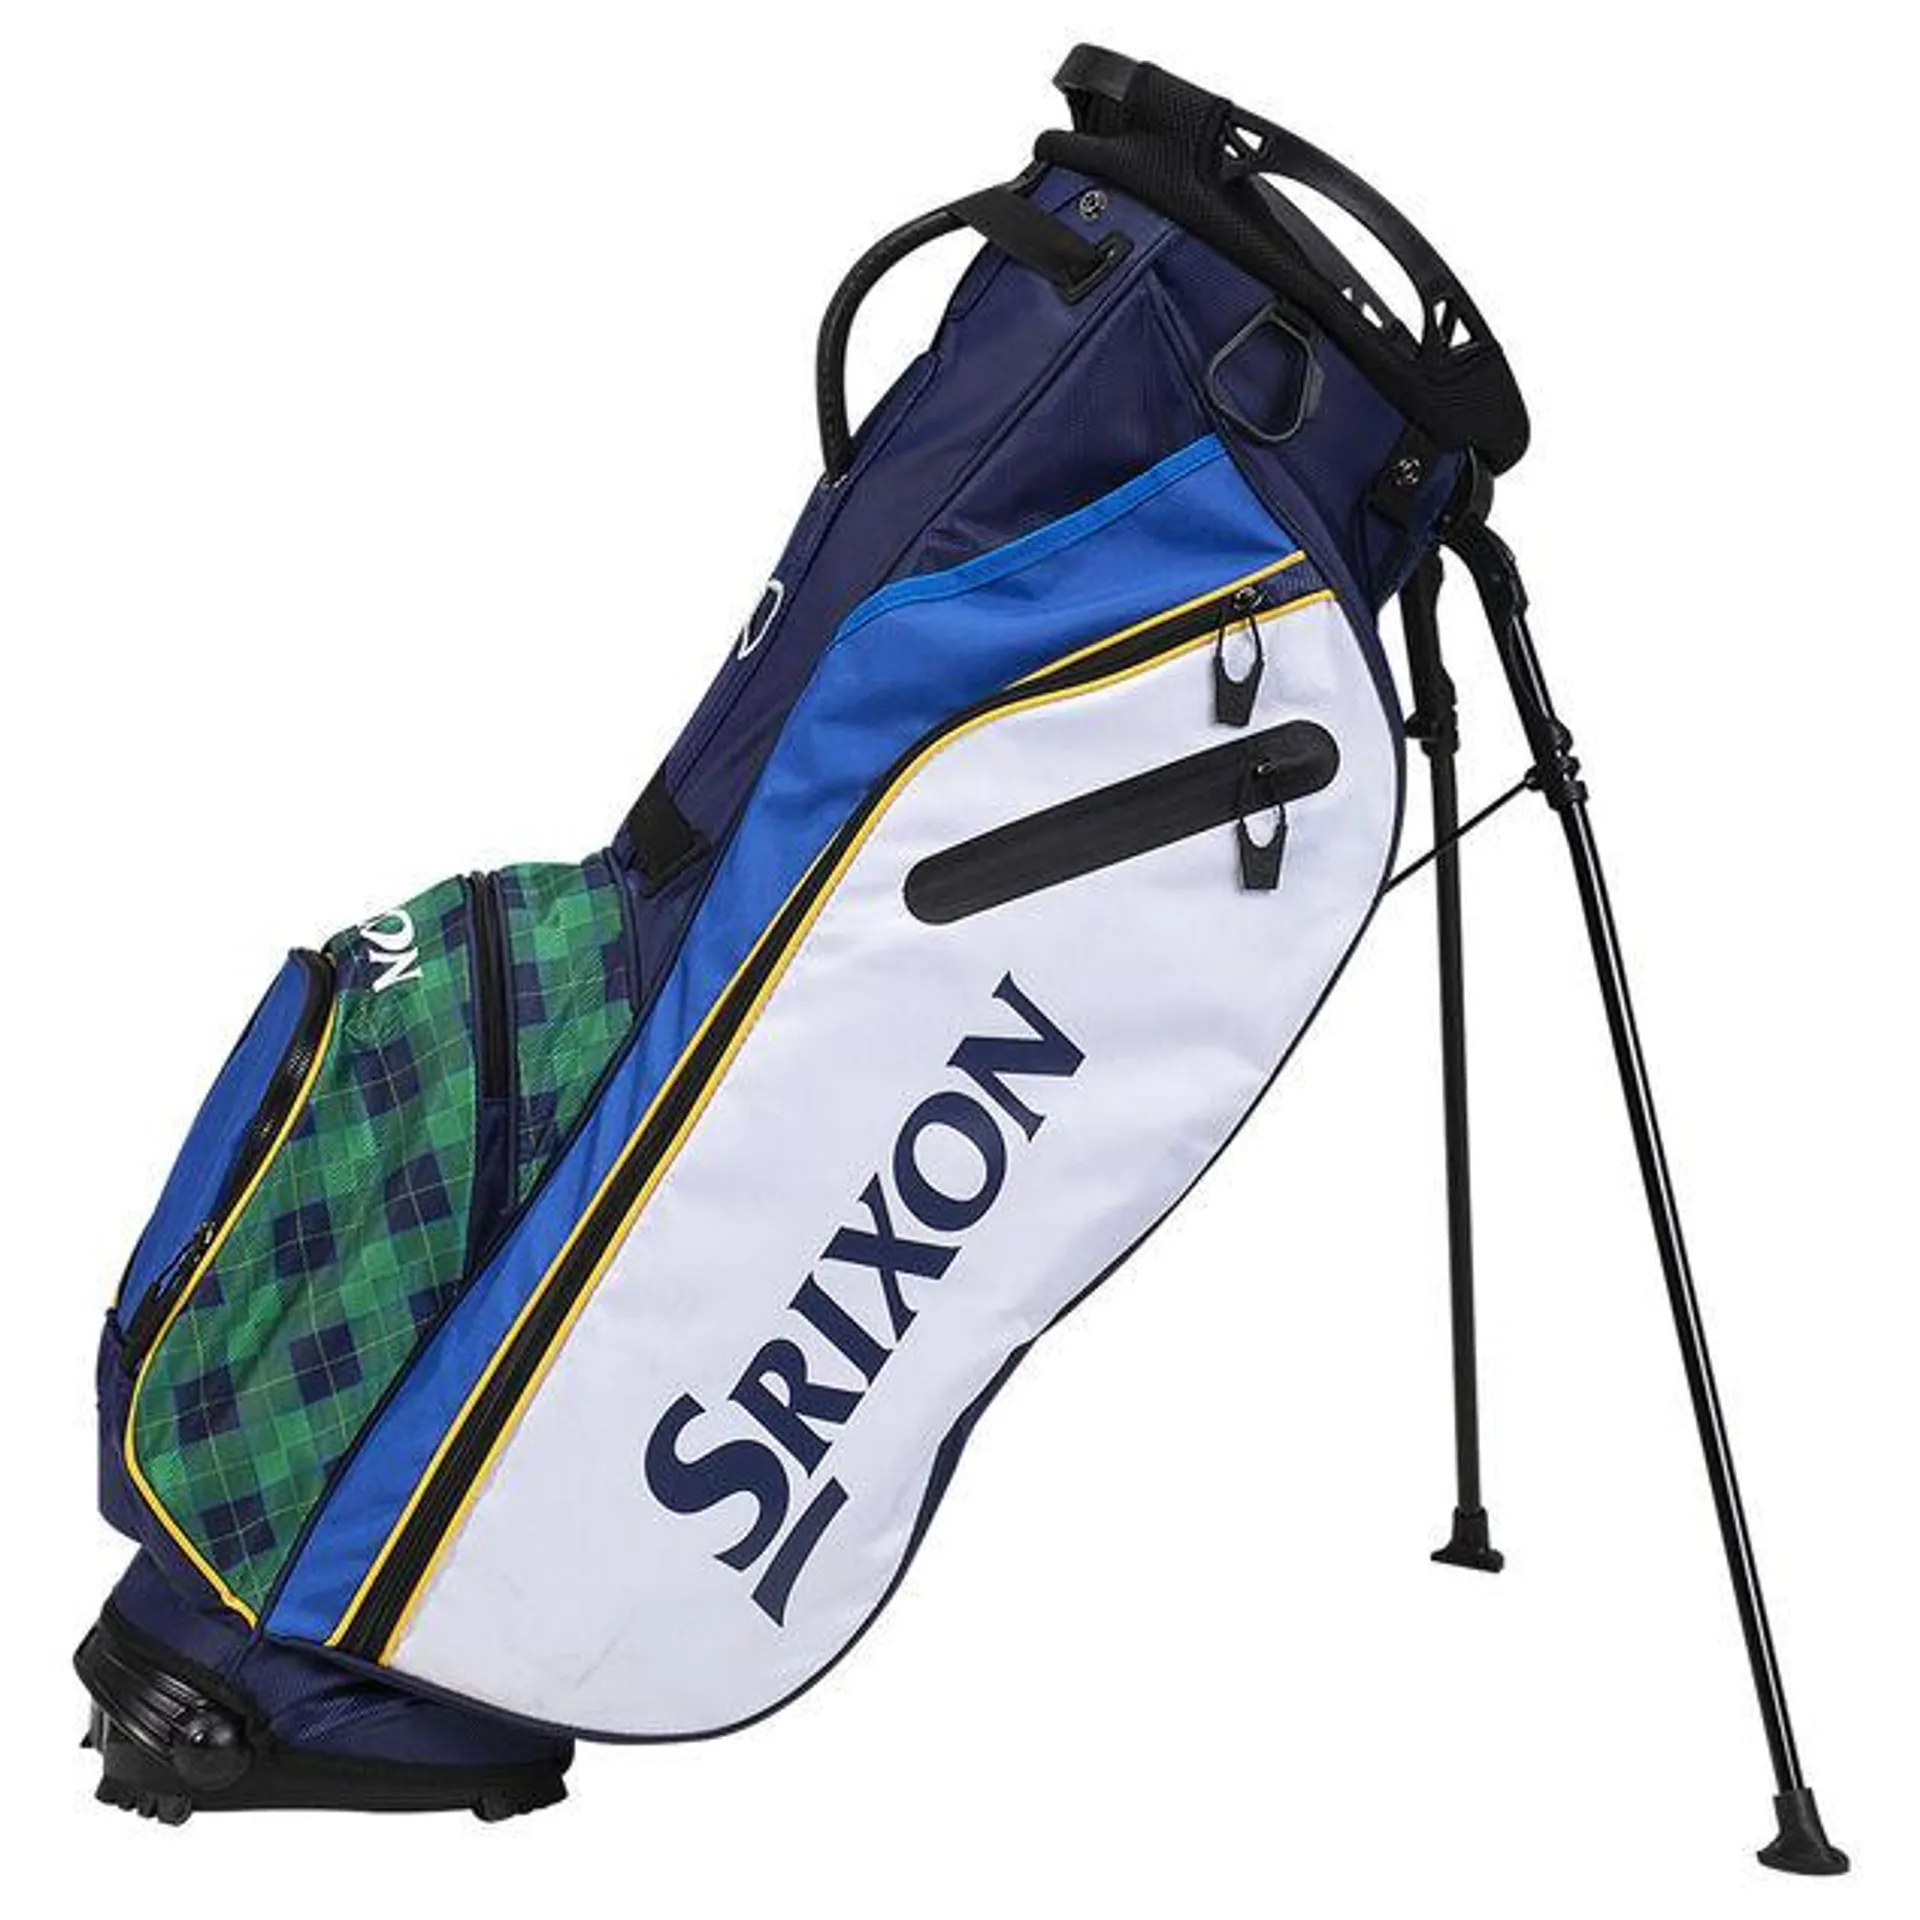 Srixon Limited-Edition The Open Tour Golf Stand Bag